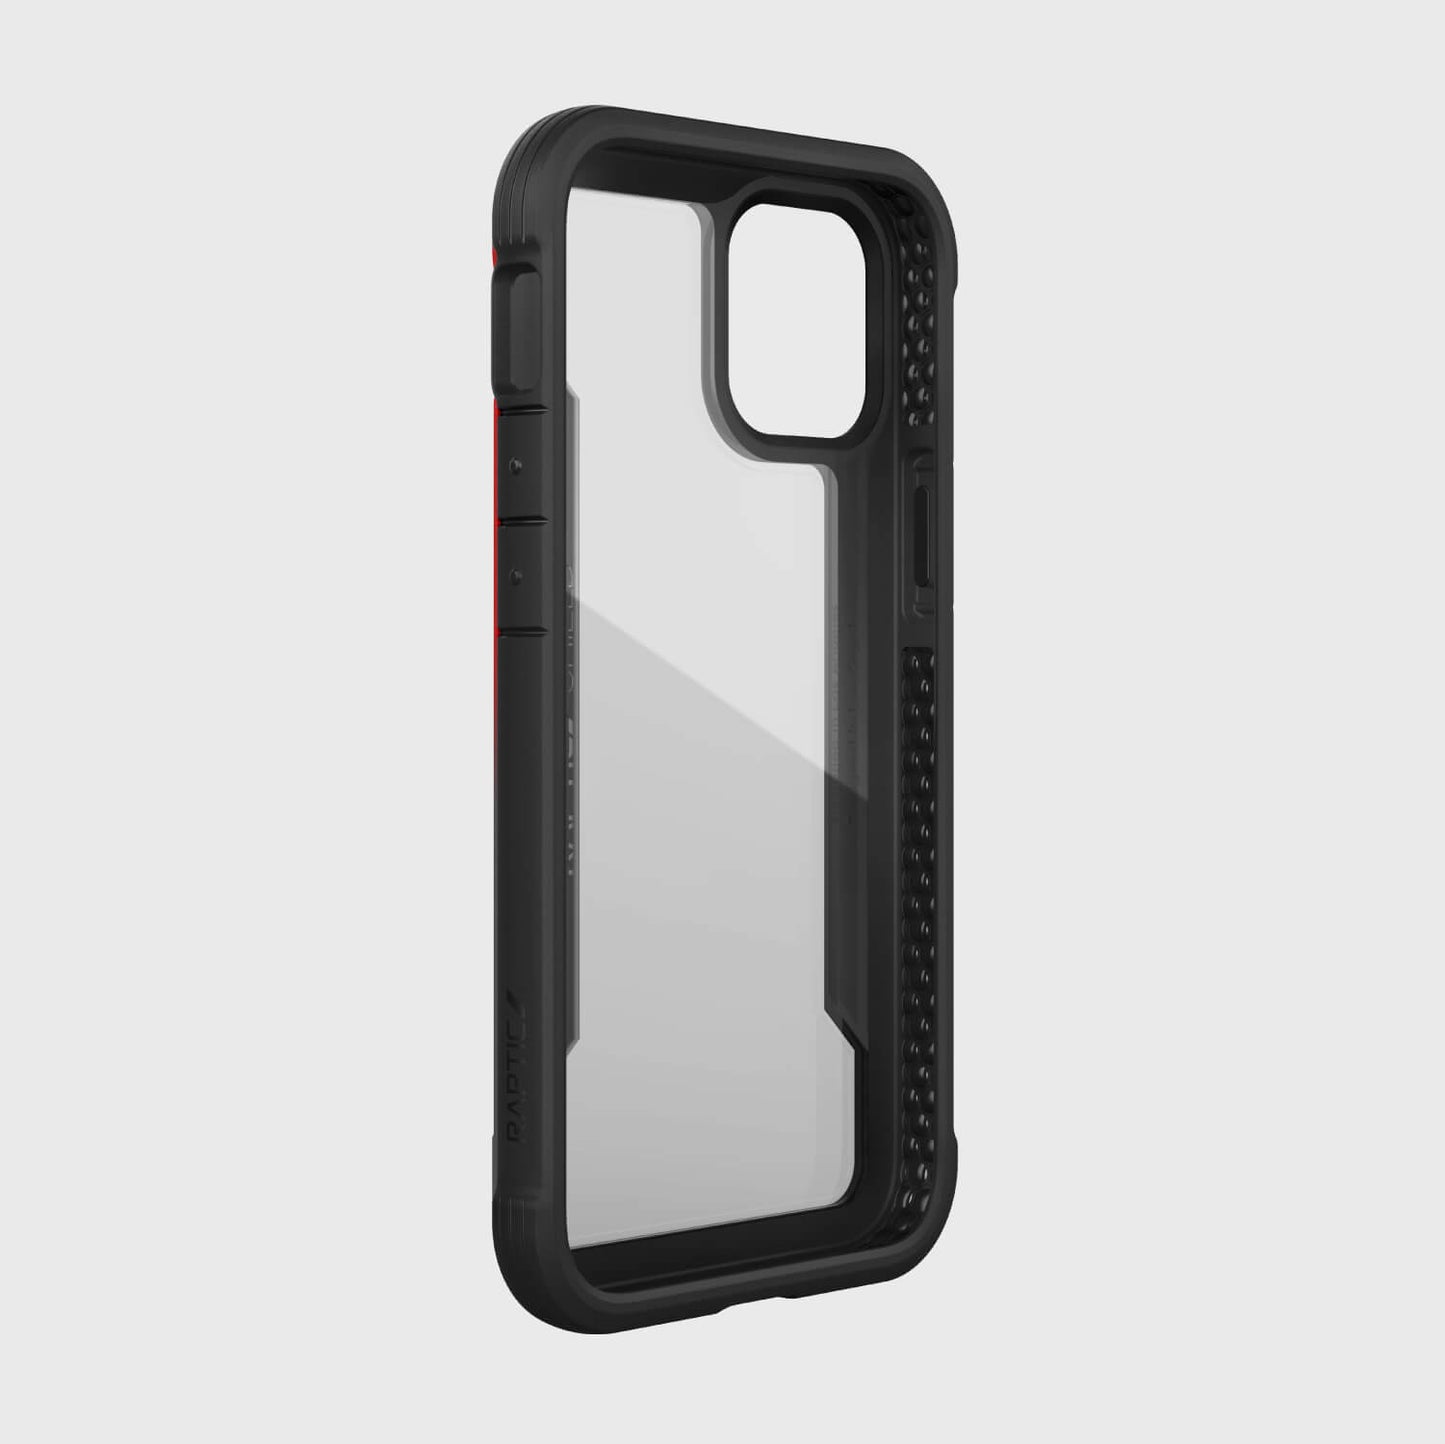 The iPhone 12 Mini Case - SHIELD by Raptic is black and red.